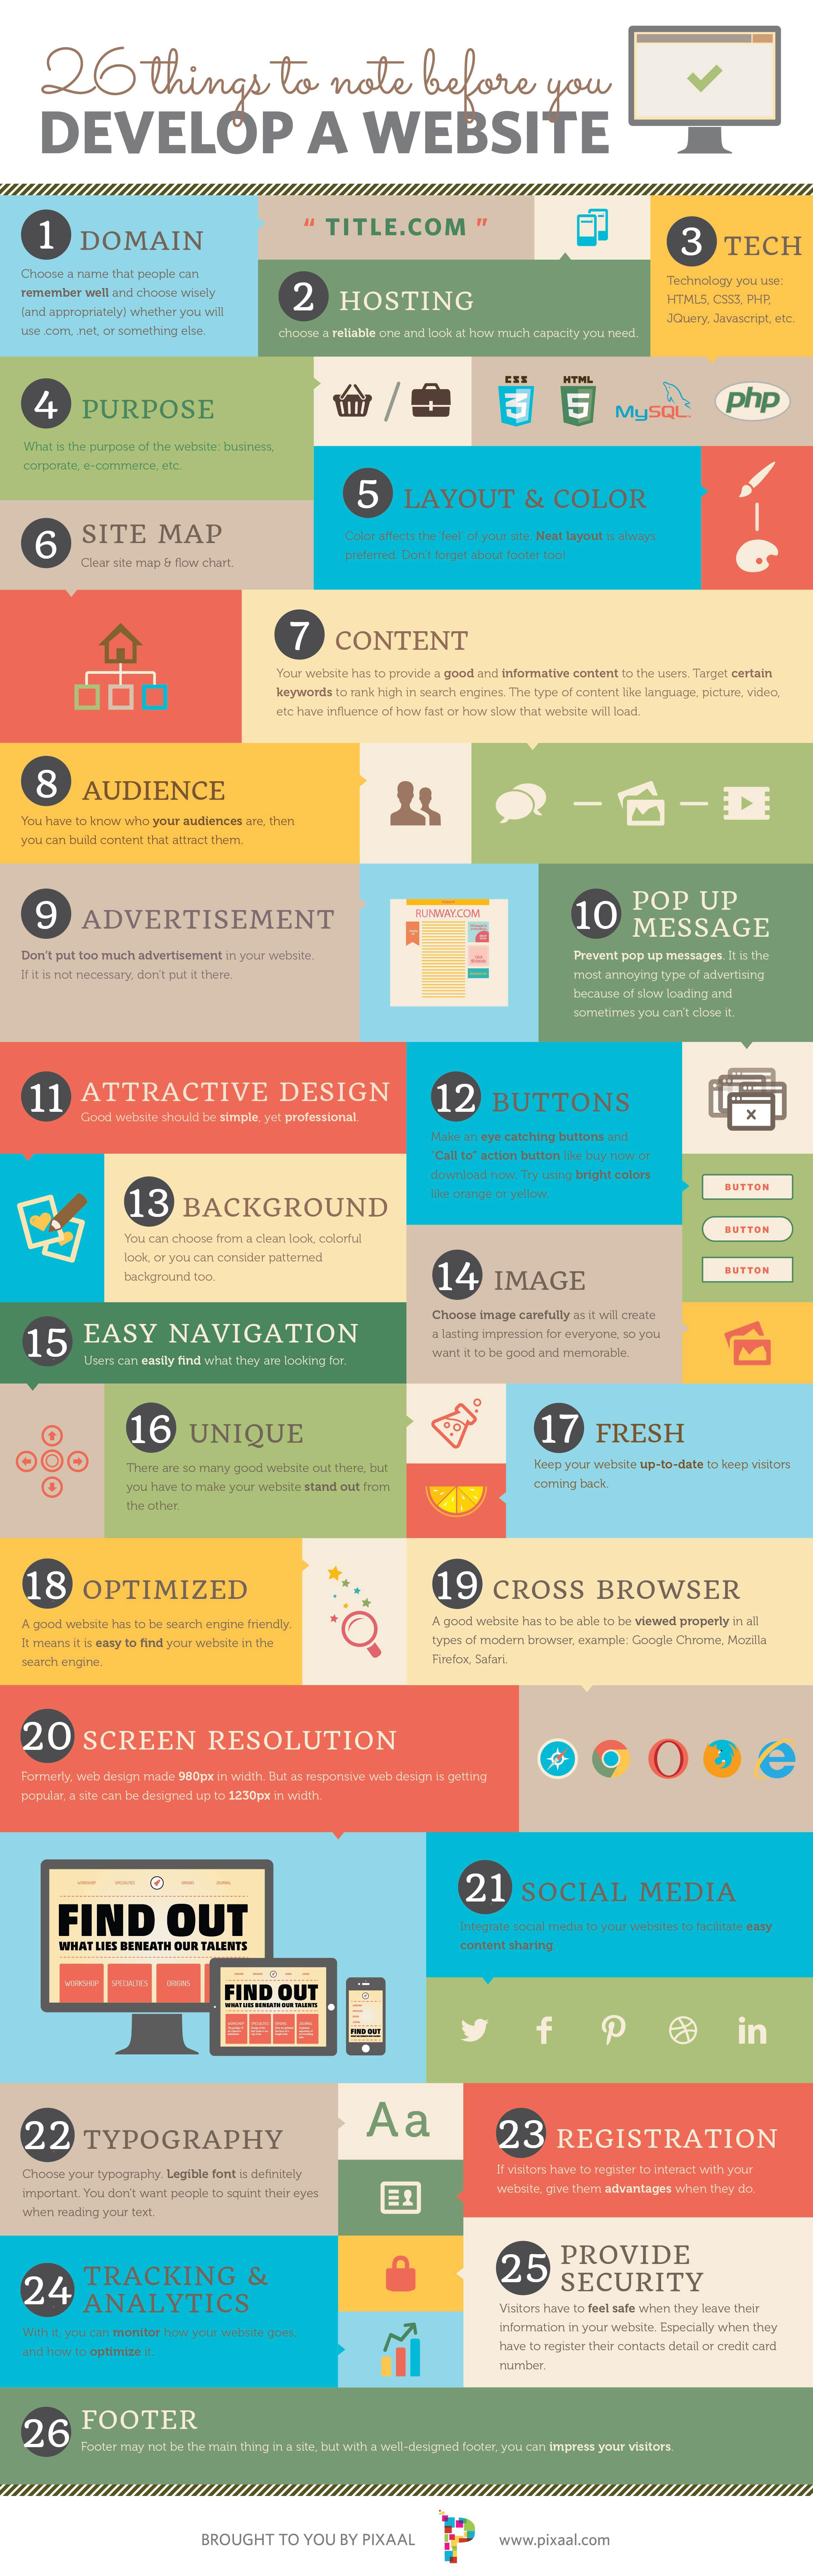 26-things-to-consider-before-you-develop-a-website